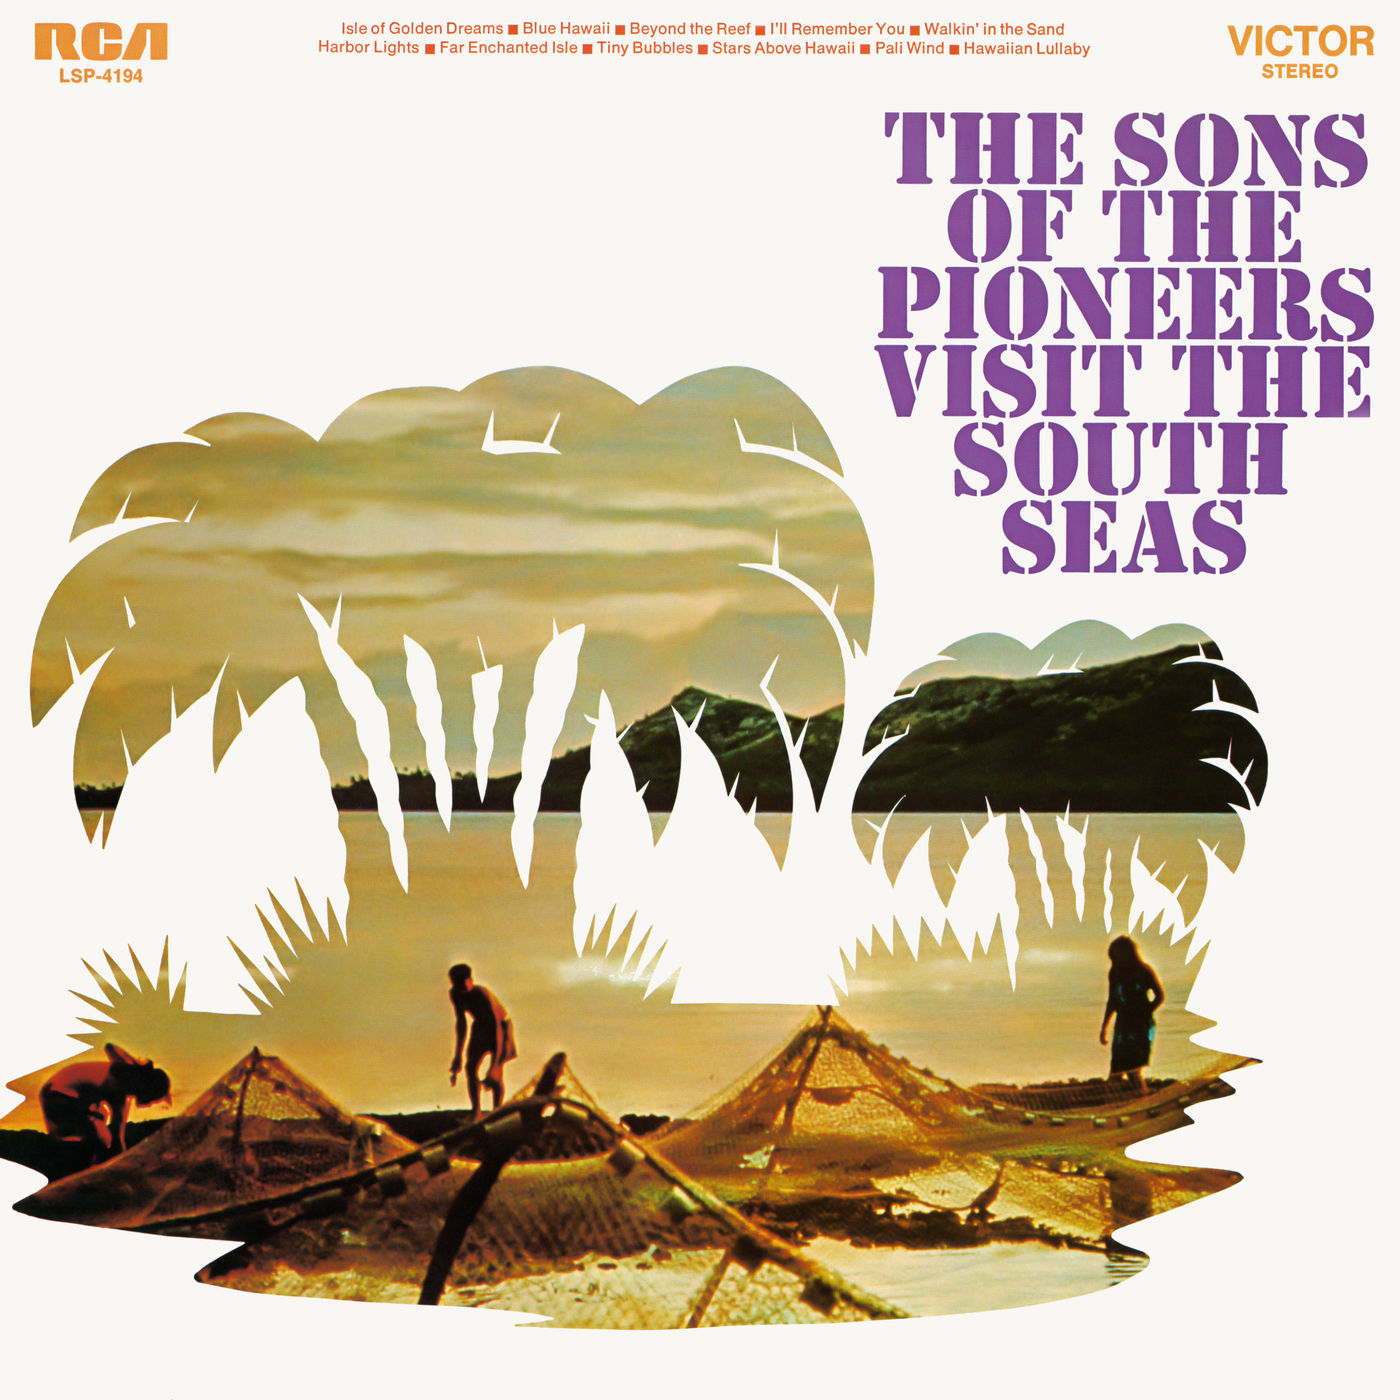 The Sons Of The Pioneers – Visit the South Seas